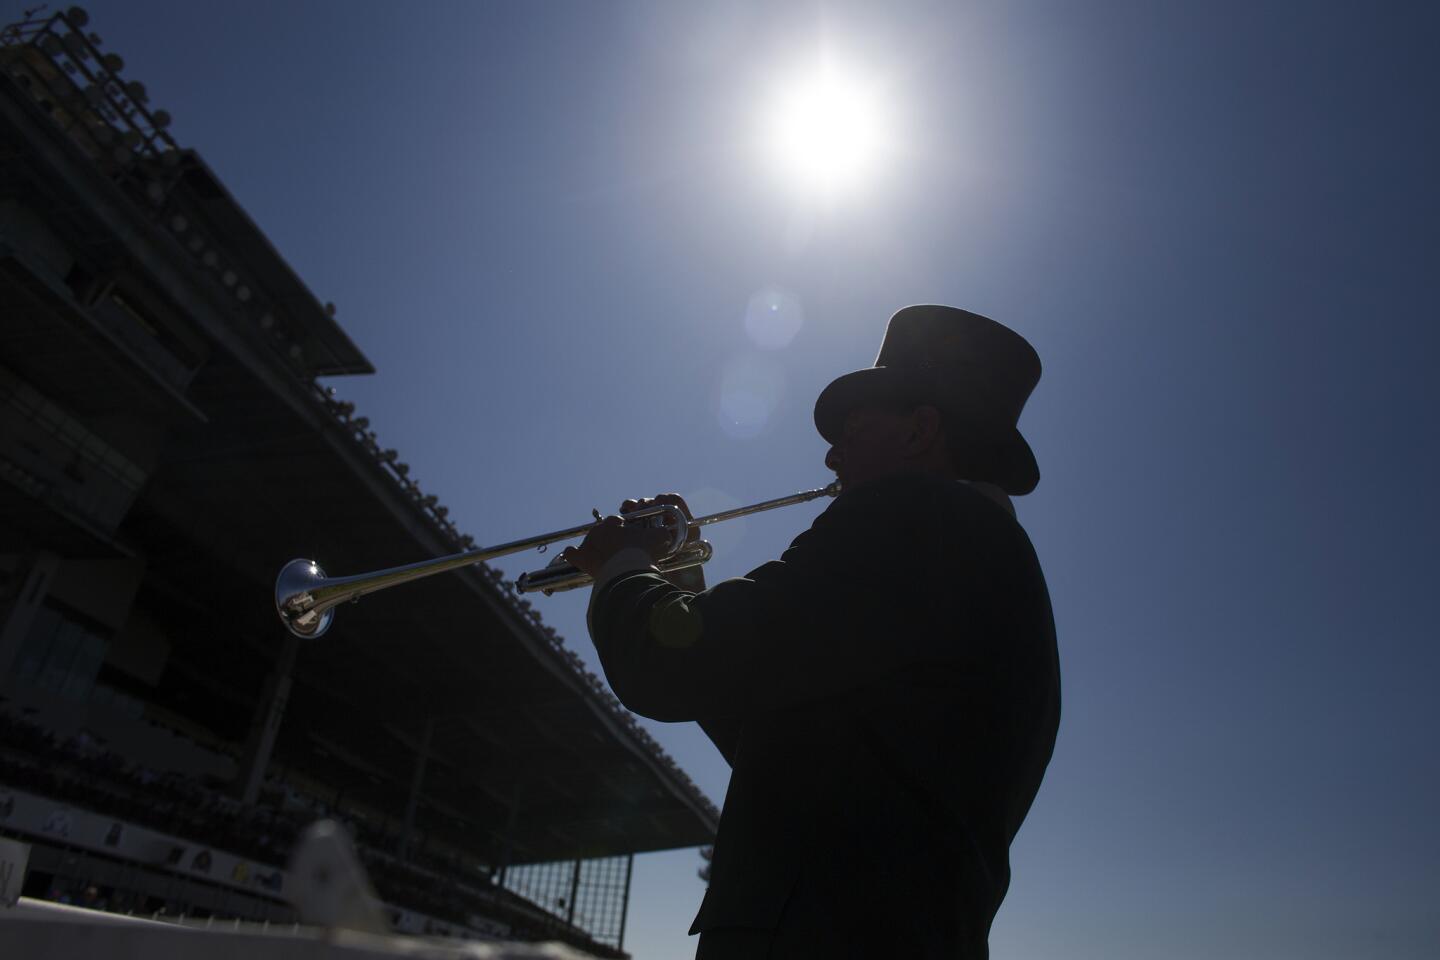 Bugle player John Cohen makes the call to post during Los Alamitos Race Course's opening day of thoroughbred racing on Thursday. Cohen has made the call more than 88,000 times.